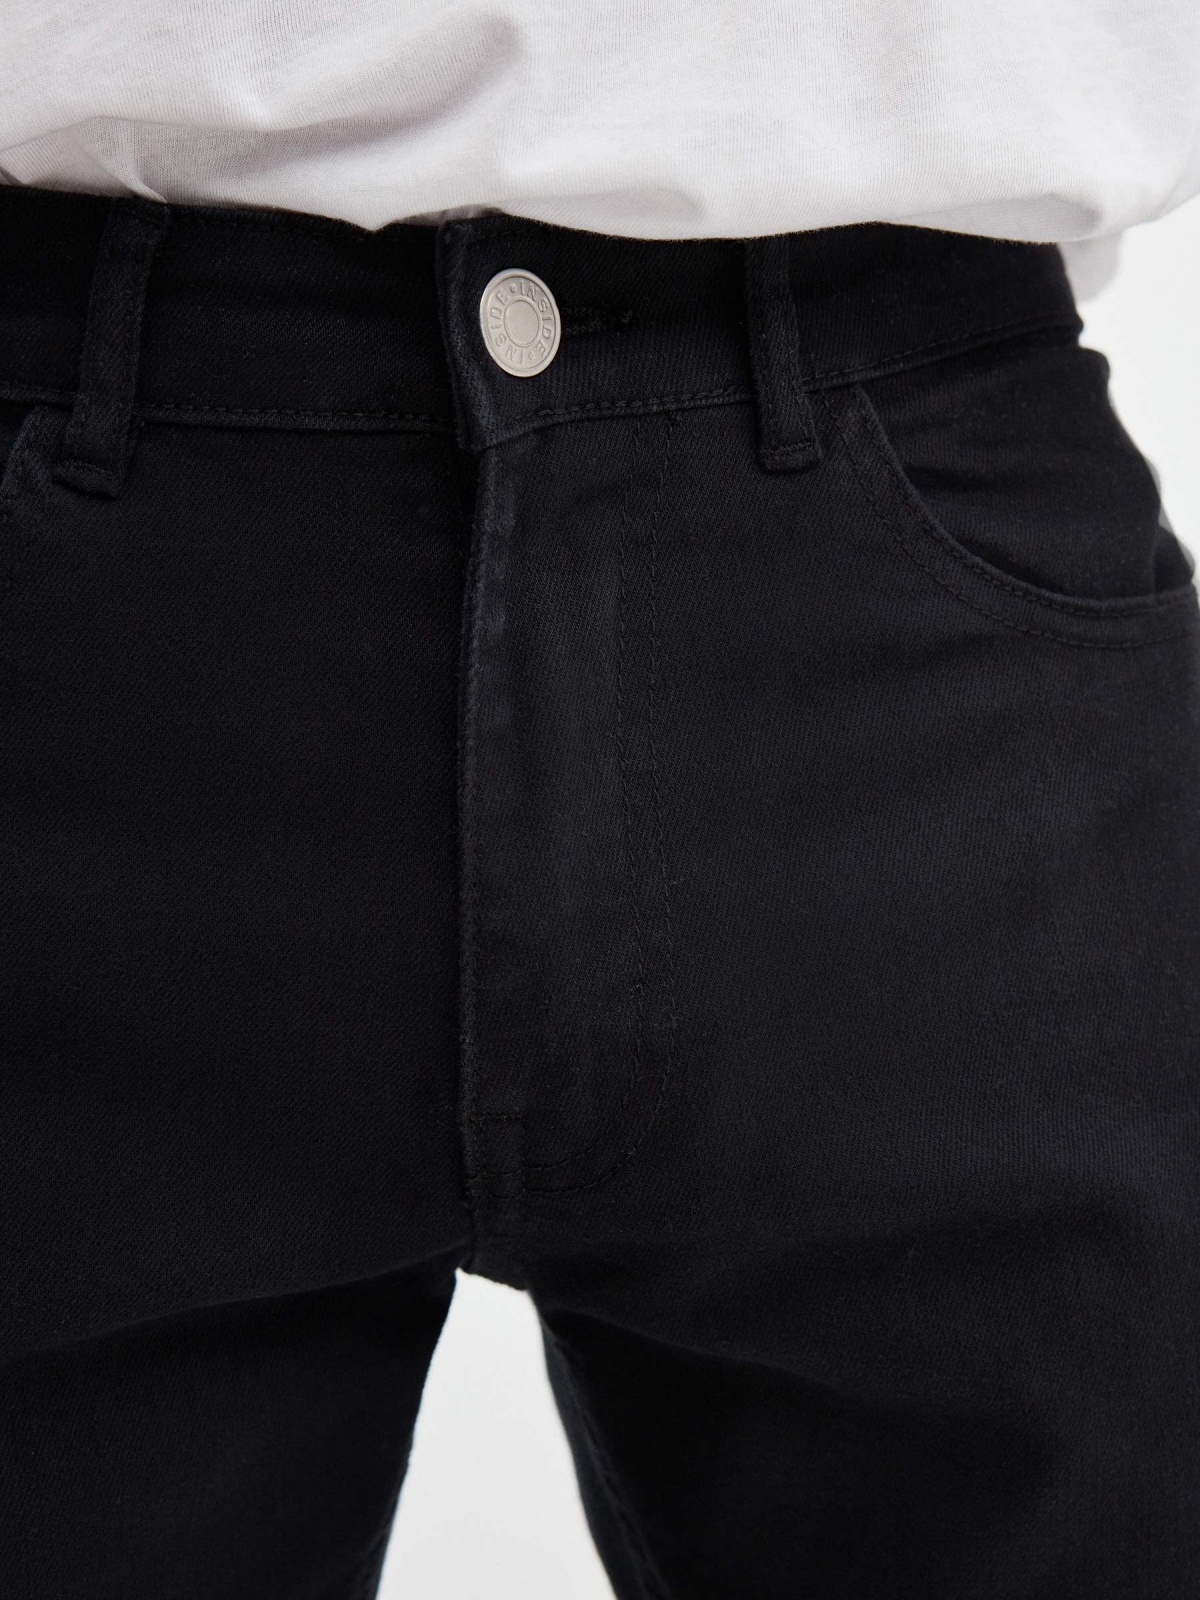 Basic colored jeans black detail view